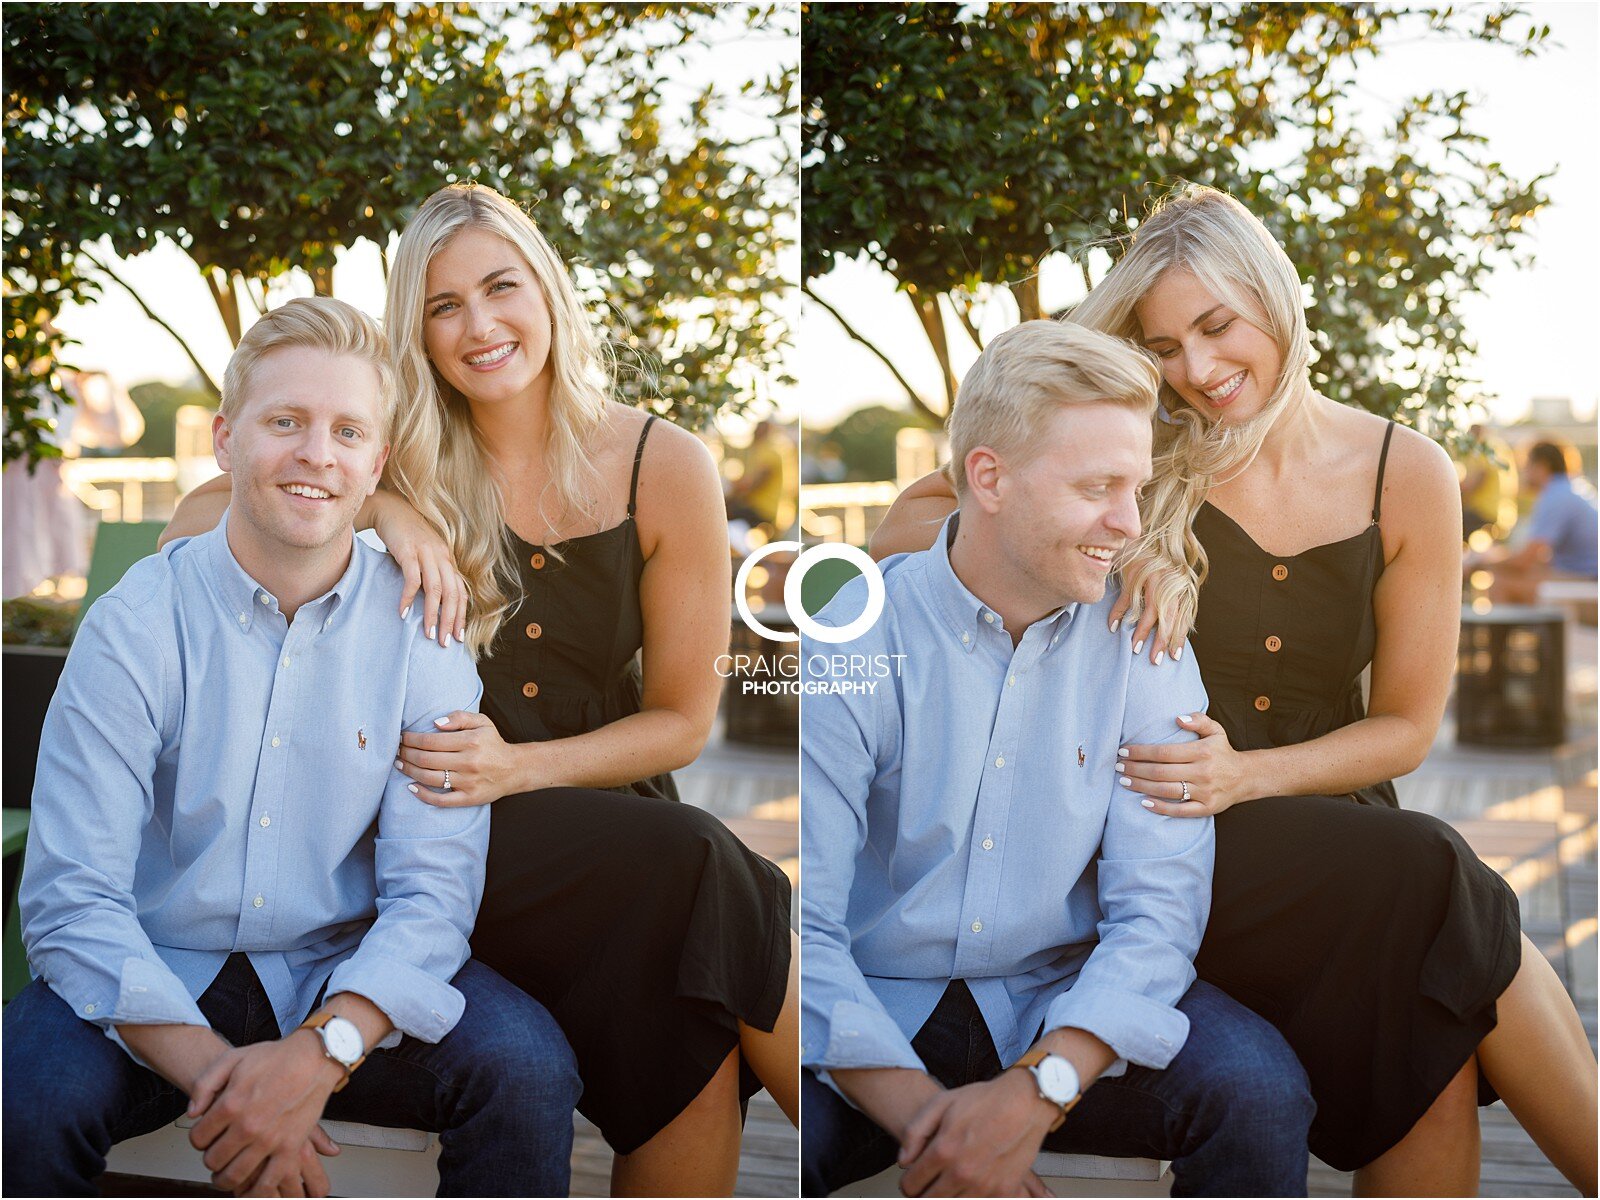 Cator Woolford Ponce city market rooftop sunset engagement portraits atlanta_0049.jpg